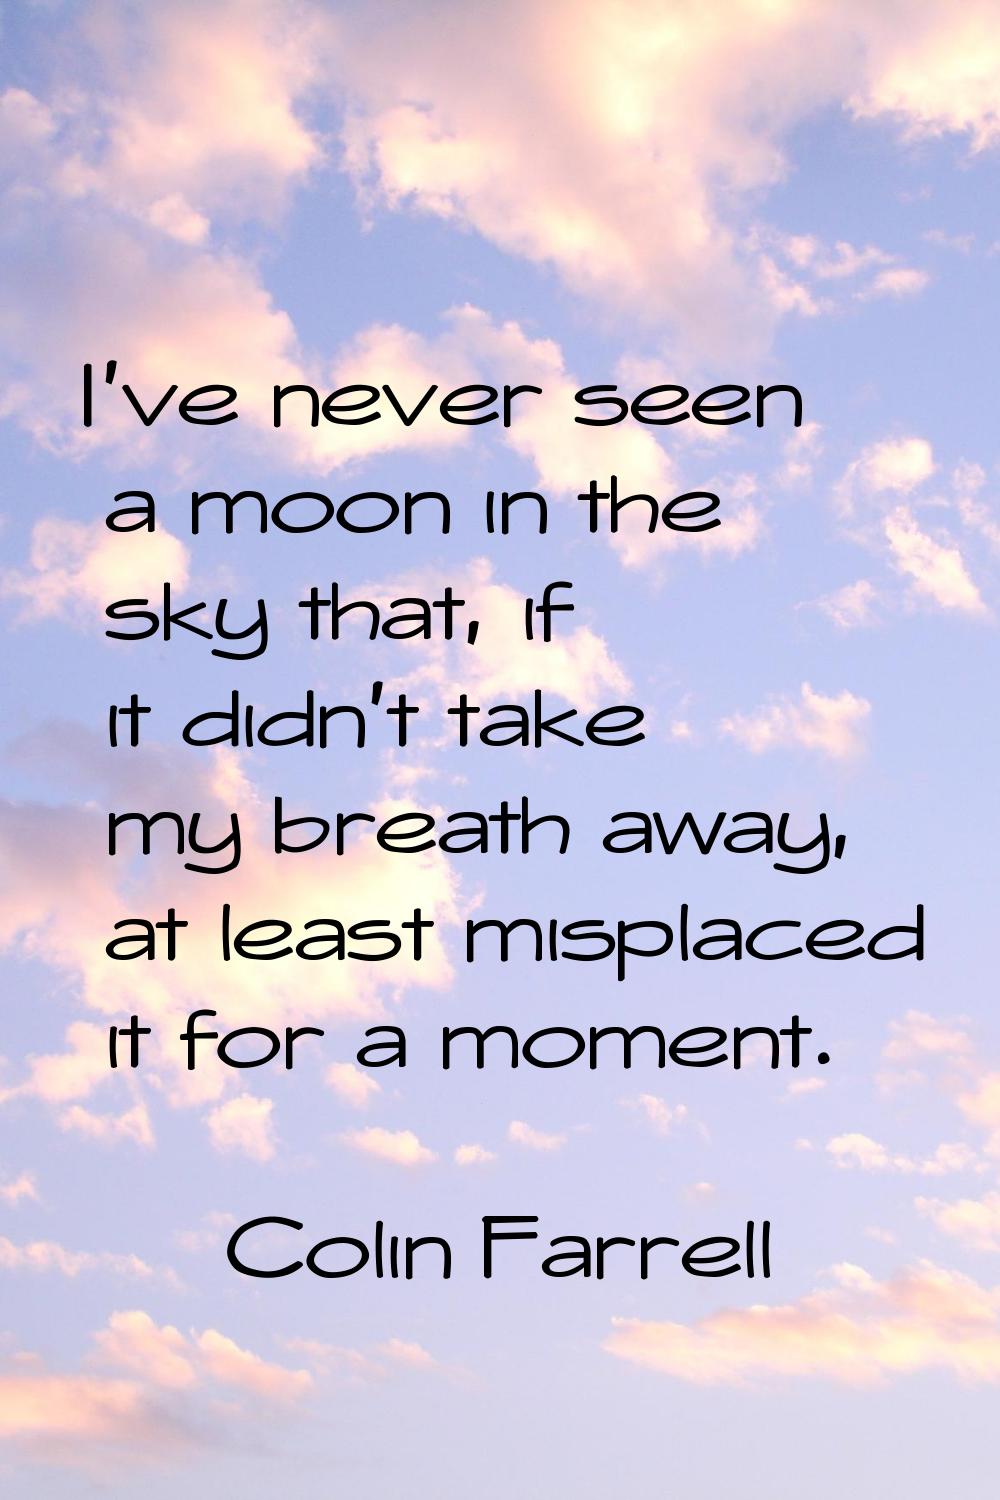 I've never seen a moon in the sky that, if it didn't take my breath away, at least misplaced it for